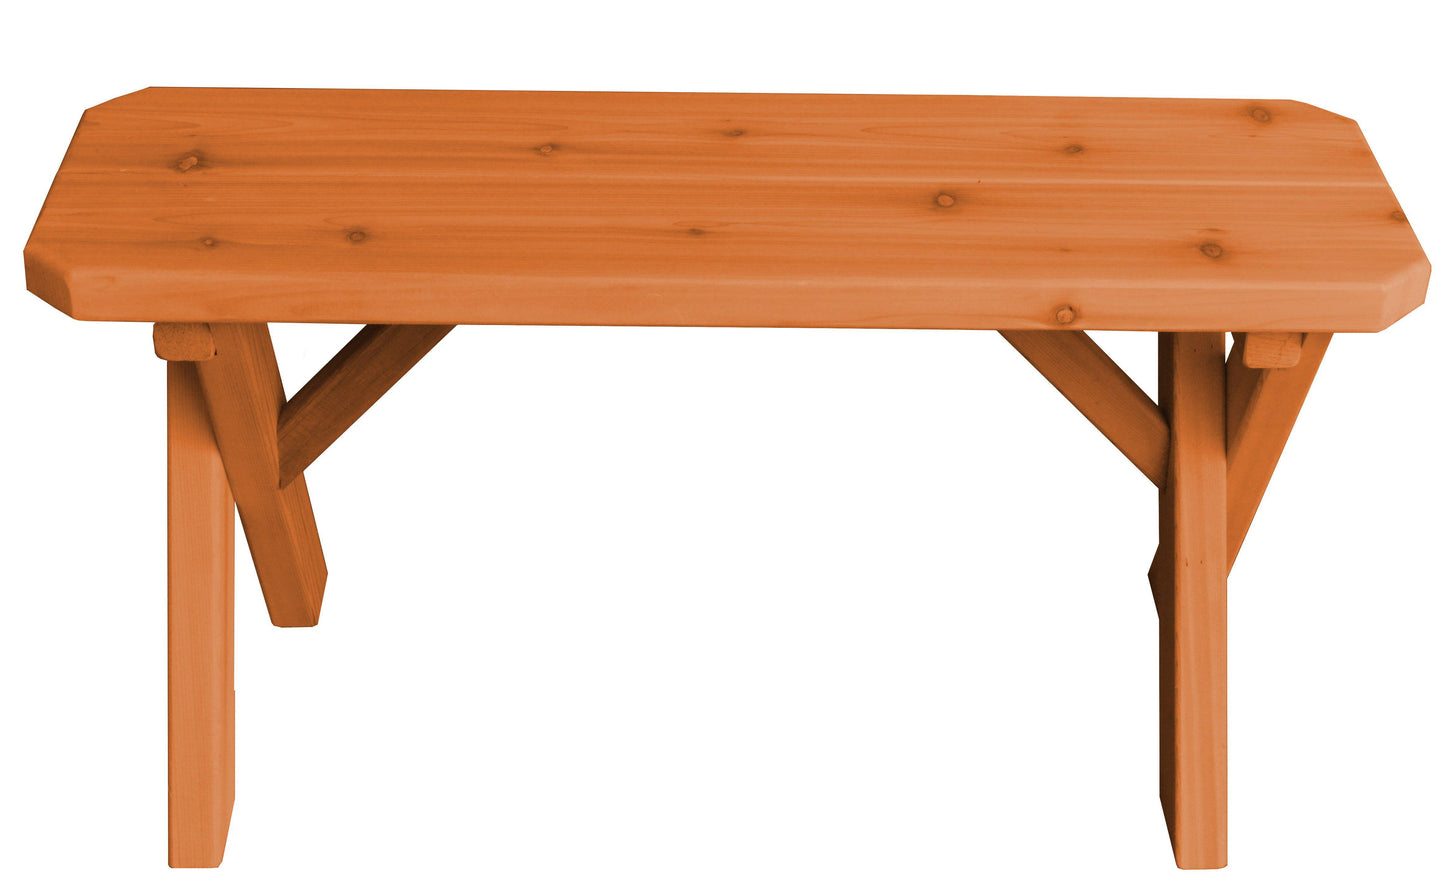 A&L FURNITURE CO. Western Red Cedar 94" Crossleg Bench Only - LEAD TIME TO SHIP 2 WEEKS